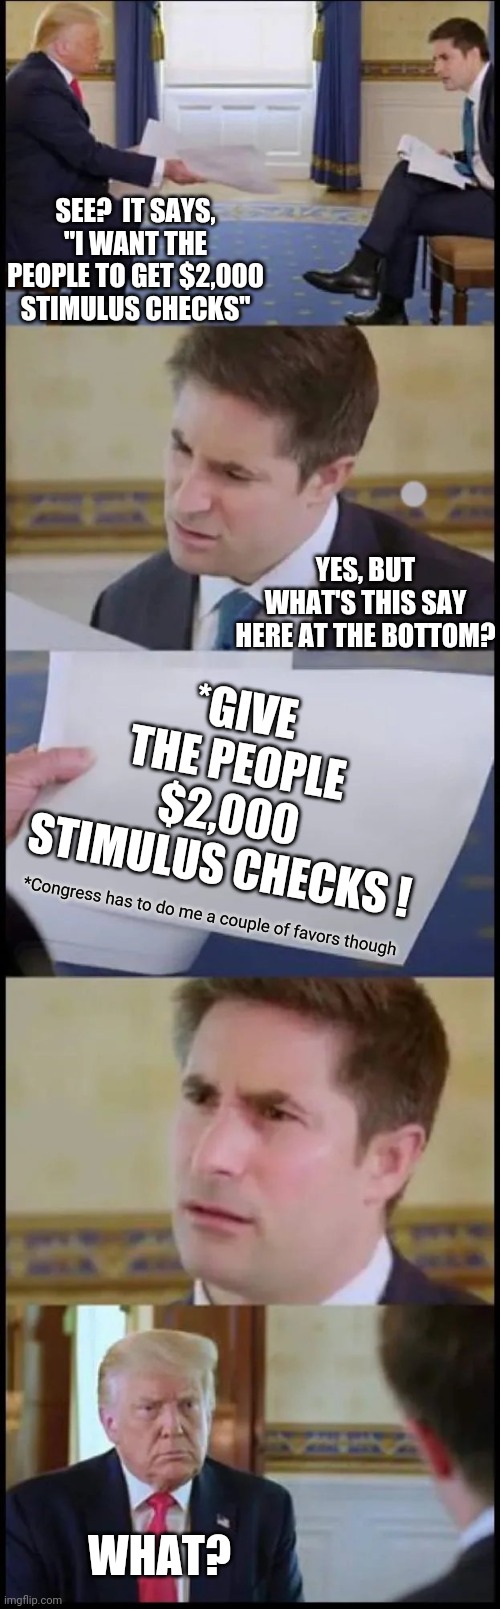 Classic Trump | SEE?  IT SAYS, "I WANT THE PEOPLE TO GET $2,000 STIMULUS CHECKS"; YES, BUT WHAT'S THIS SAY HERE AT THE BOTTOM? *GIVE THE PEOPLE $2,000 STIMULUS CHECKS ! *Congress has to do me a couple of favors though; WHAT? | image tagged in trump interview reaction full,memes,trump unfit unqualified dangerous,liar in chief,lock him up,trump lies | made w/ Imgflip meme maker